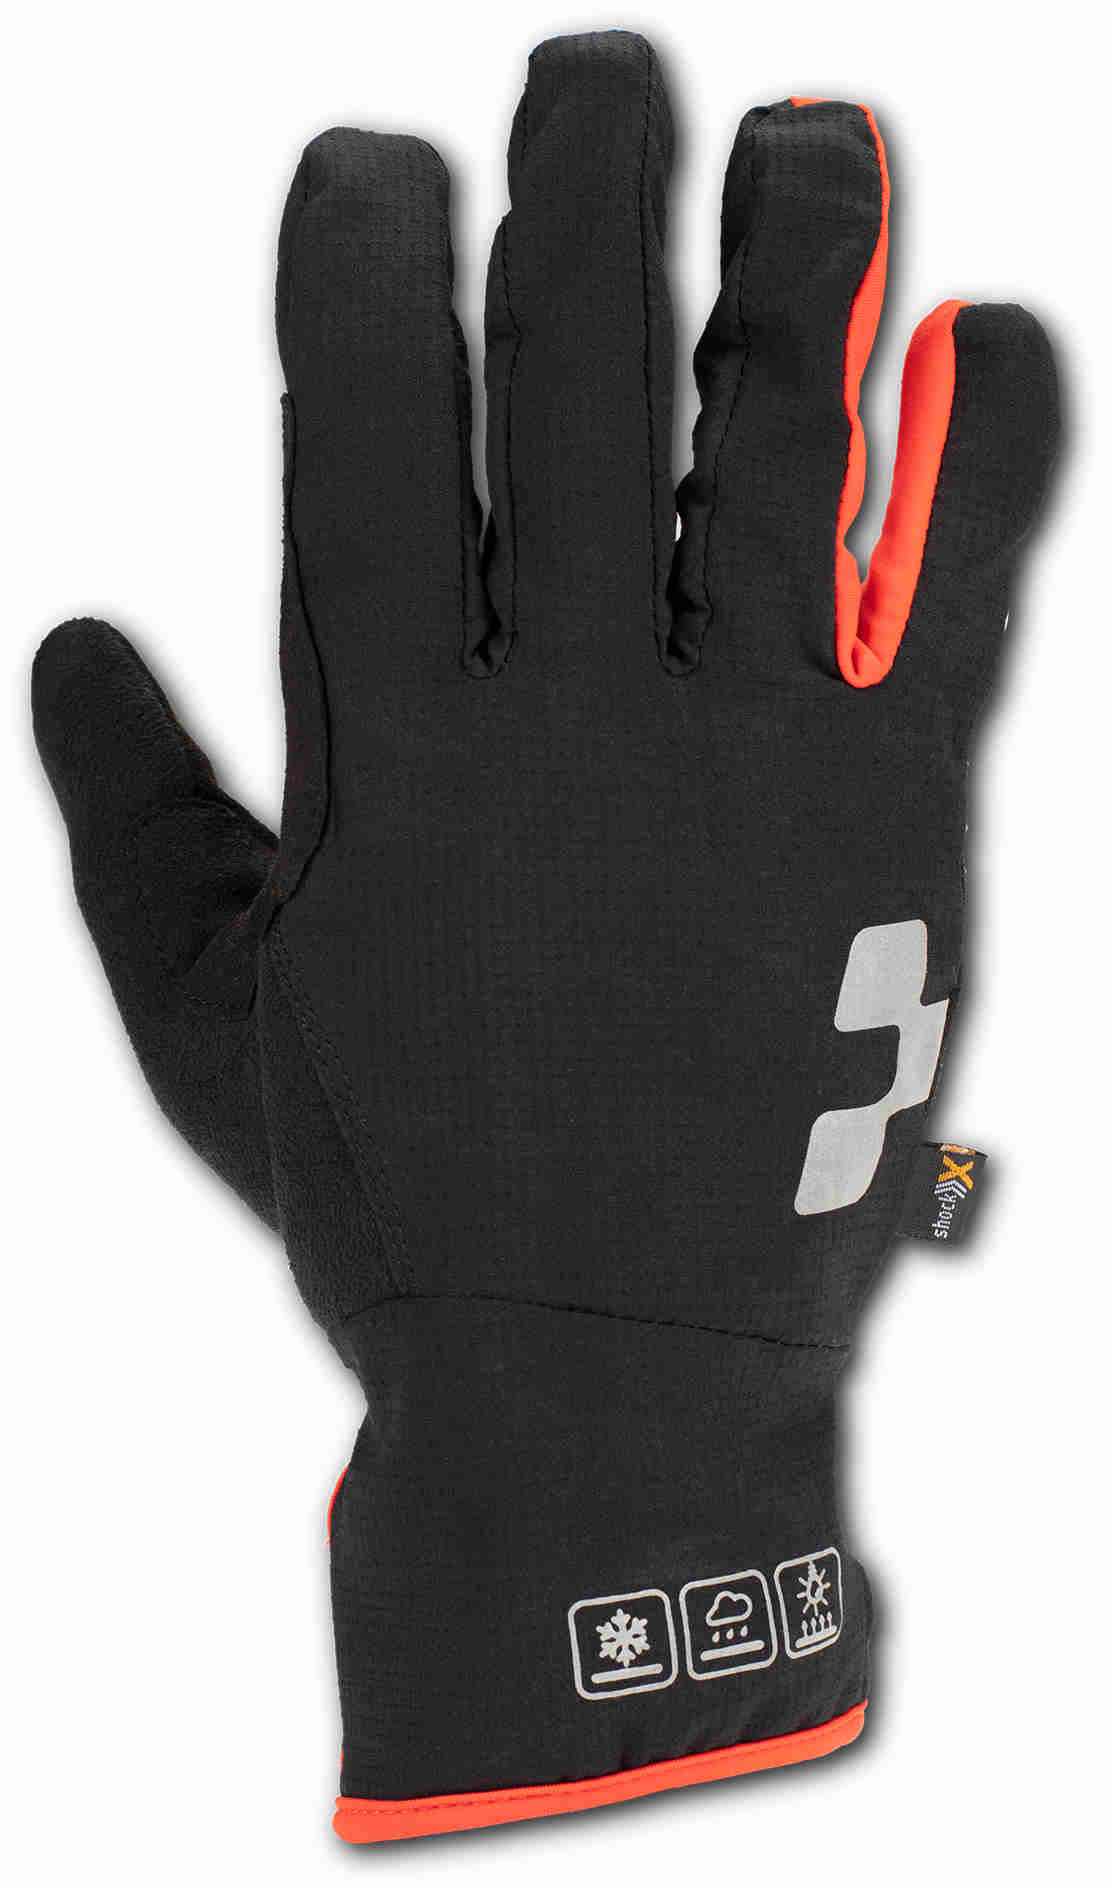 CUBE NATURAL FIT GLOVES X-SHELL L/F BLKLINE